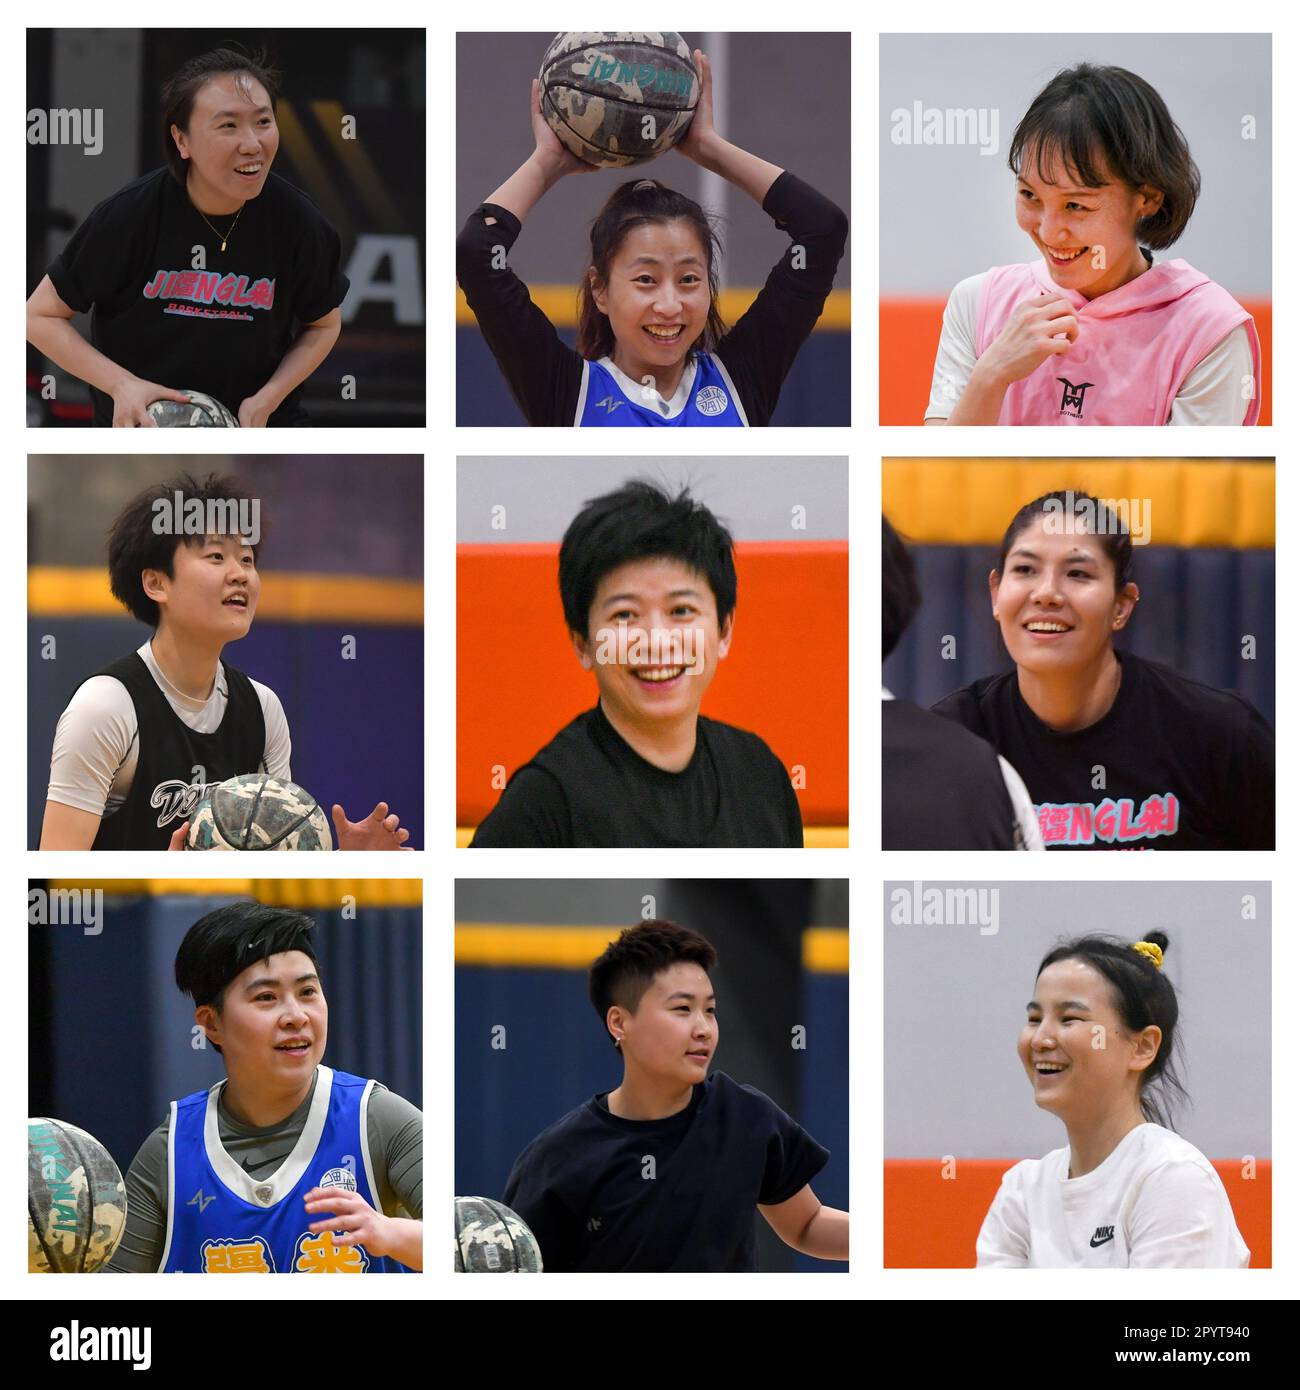 (230505) -- URUMQI, May 5, 2023 (Xinhua) -- This combo photo shows members of Jiang Lai Women's Basketball Club. In Urumqi, northwest China's Xinjiang Uygur Autonomous Region, a group of female basketball players have formed a basketball club named Jiang Lai. The club members are individuals from ethnic groups such as Han, Uygur, Kazak, Mongolian and Hui. According to Wang Na, the founder of the club, the name Jiang Lai means the team comes from Xinjiang.In the past few years, its membership has grown from 15 to nearly 100. With their growing influence, they organized a series of women's baske Stock Photo